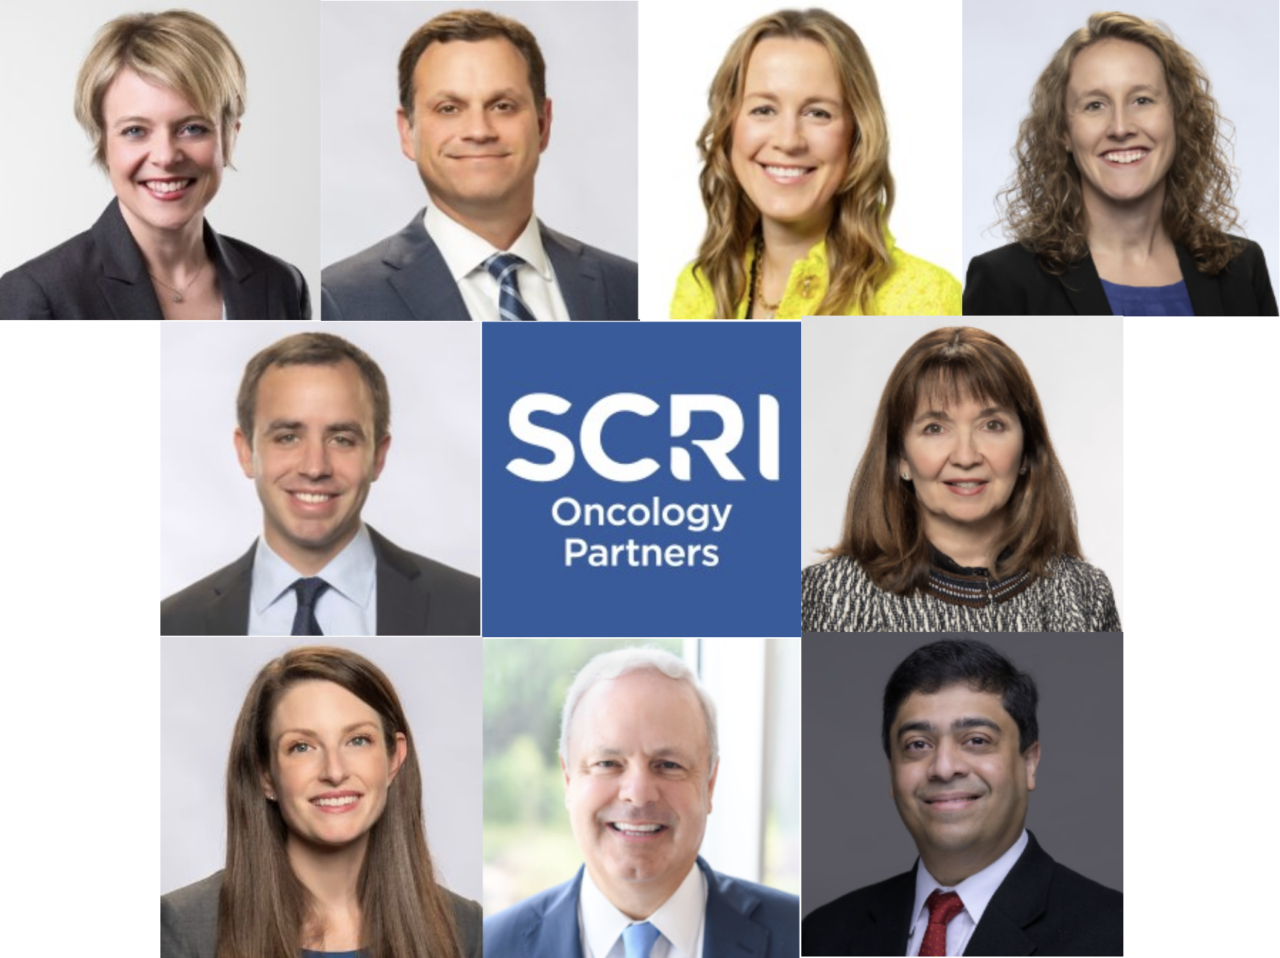 SCRI Oncology Partners introduces its members